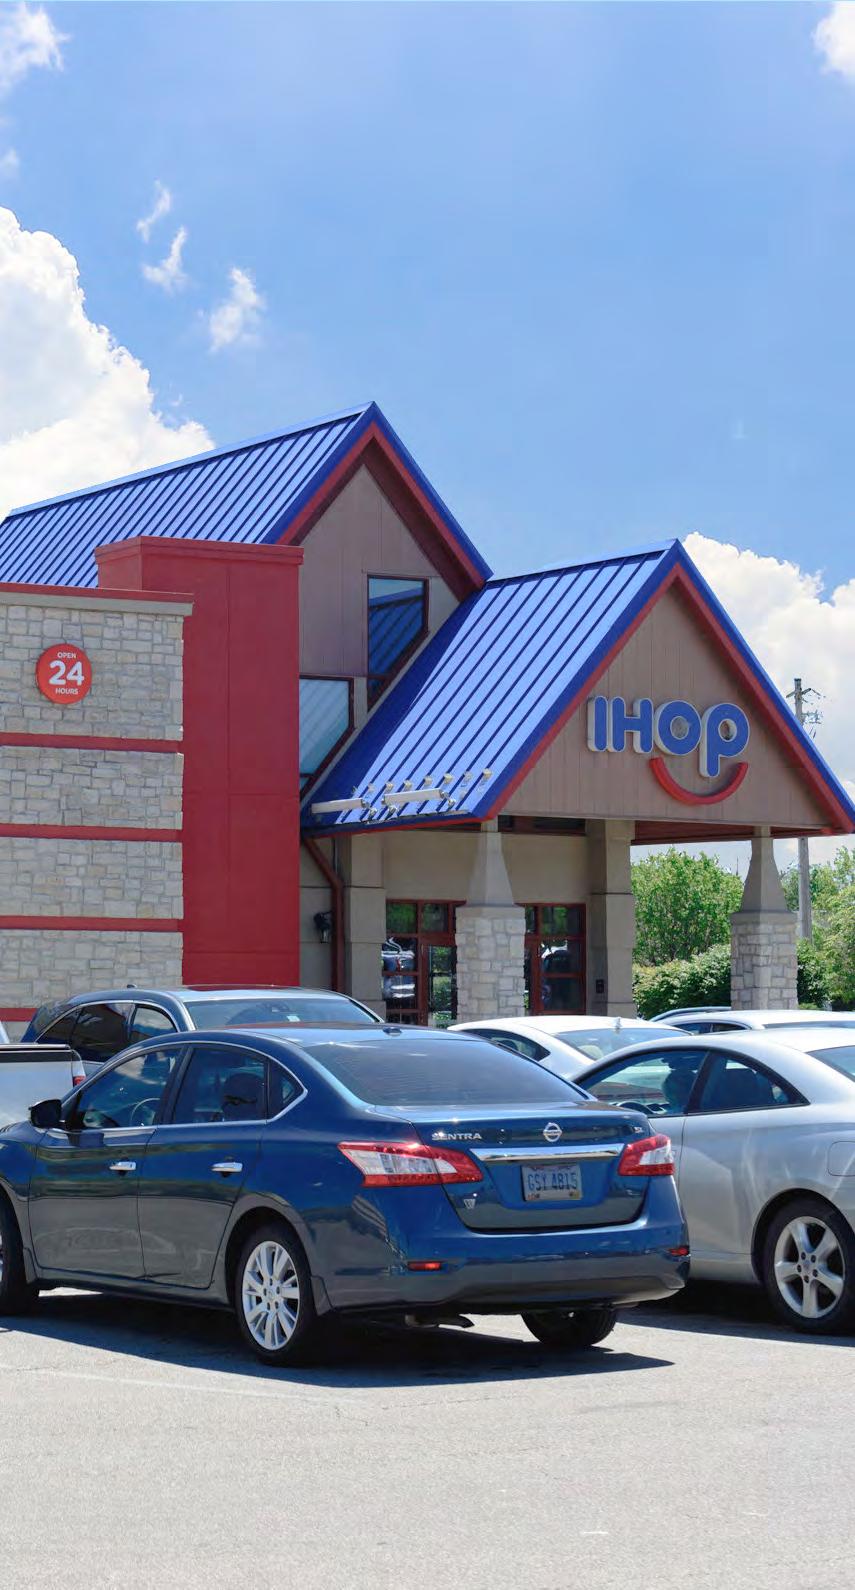 Overview IHOP 9540 COLERAIN AVENUE, CINCINNATI, OH 45251 LEASABLE SF 6,395 SF LEASE EXPIRATION 11/30/2030 LAND AREA 62,813 SF YEAR BUILT 2005 LEASE TYPE Corporate Ground Lease PARKING 74 SPACES